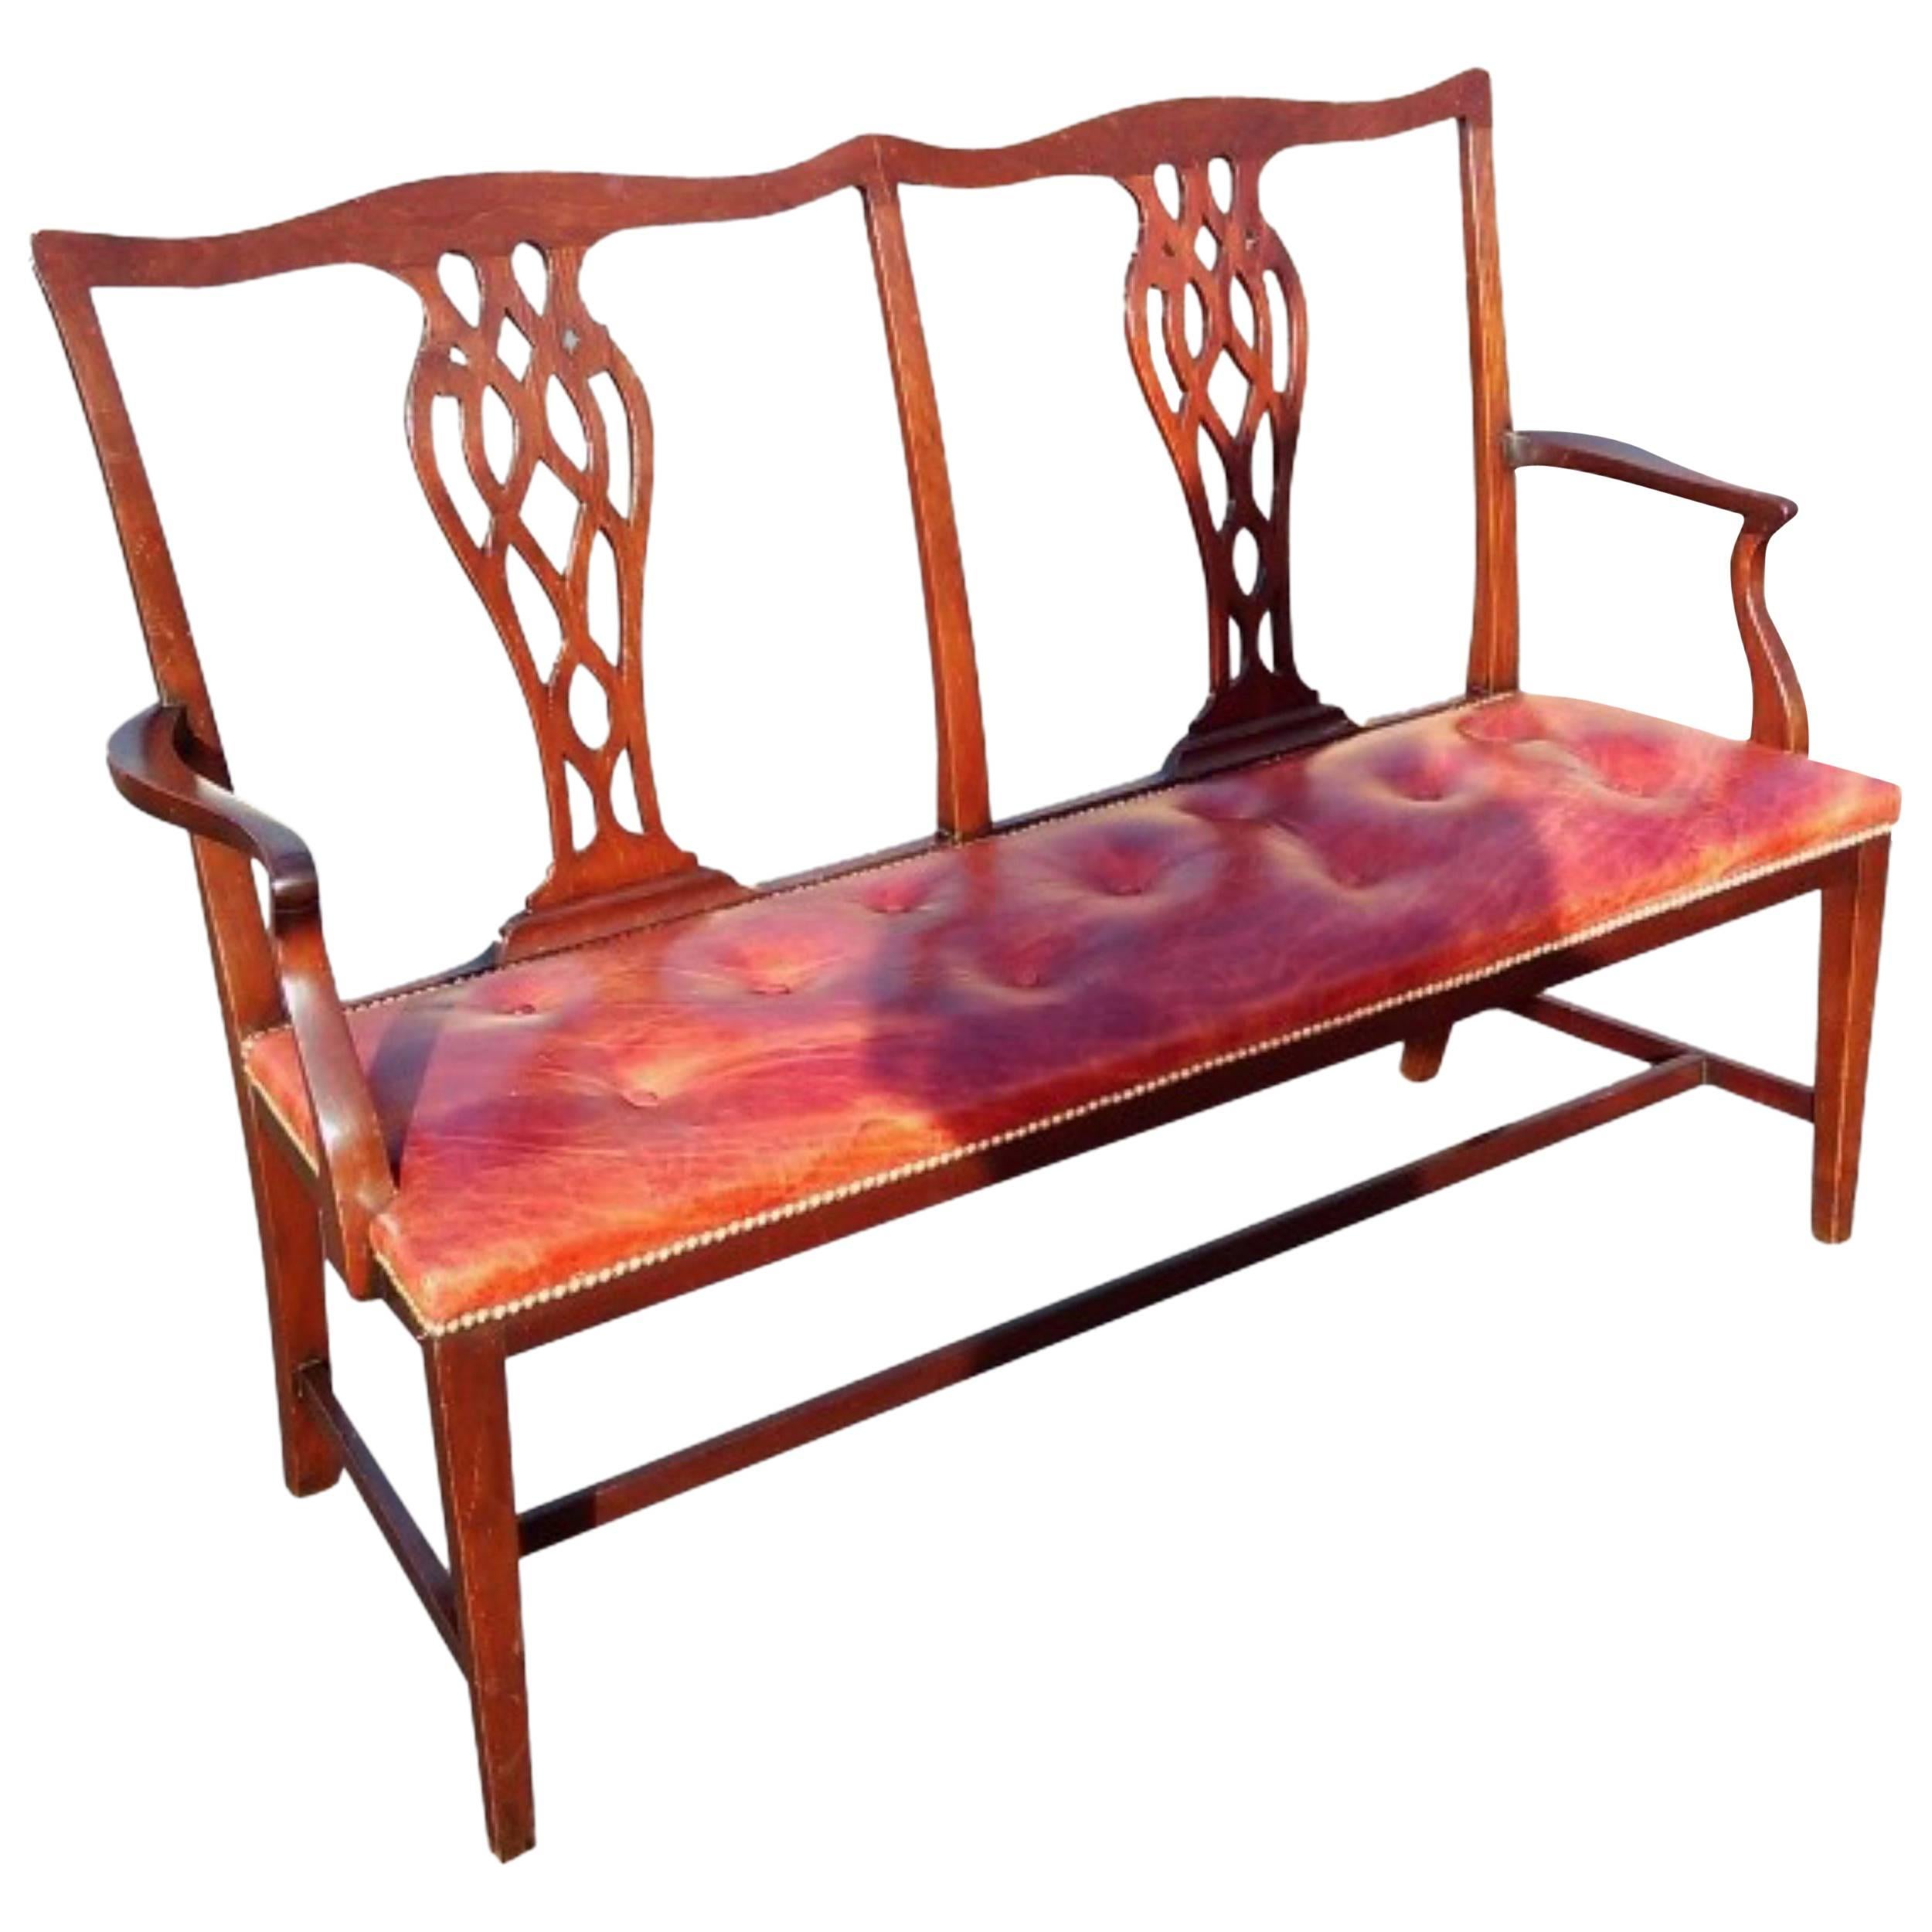 Elegant 19th century mahogany chair back settee; the twin chair backs with shaped crest rail and two vase shaped pierced splats on a buttoned red leather upholstered seat with a brass studded edge; the shaped arms with scroll supports; standing on